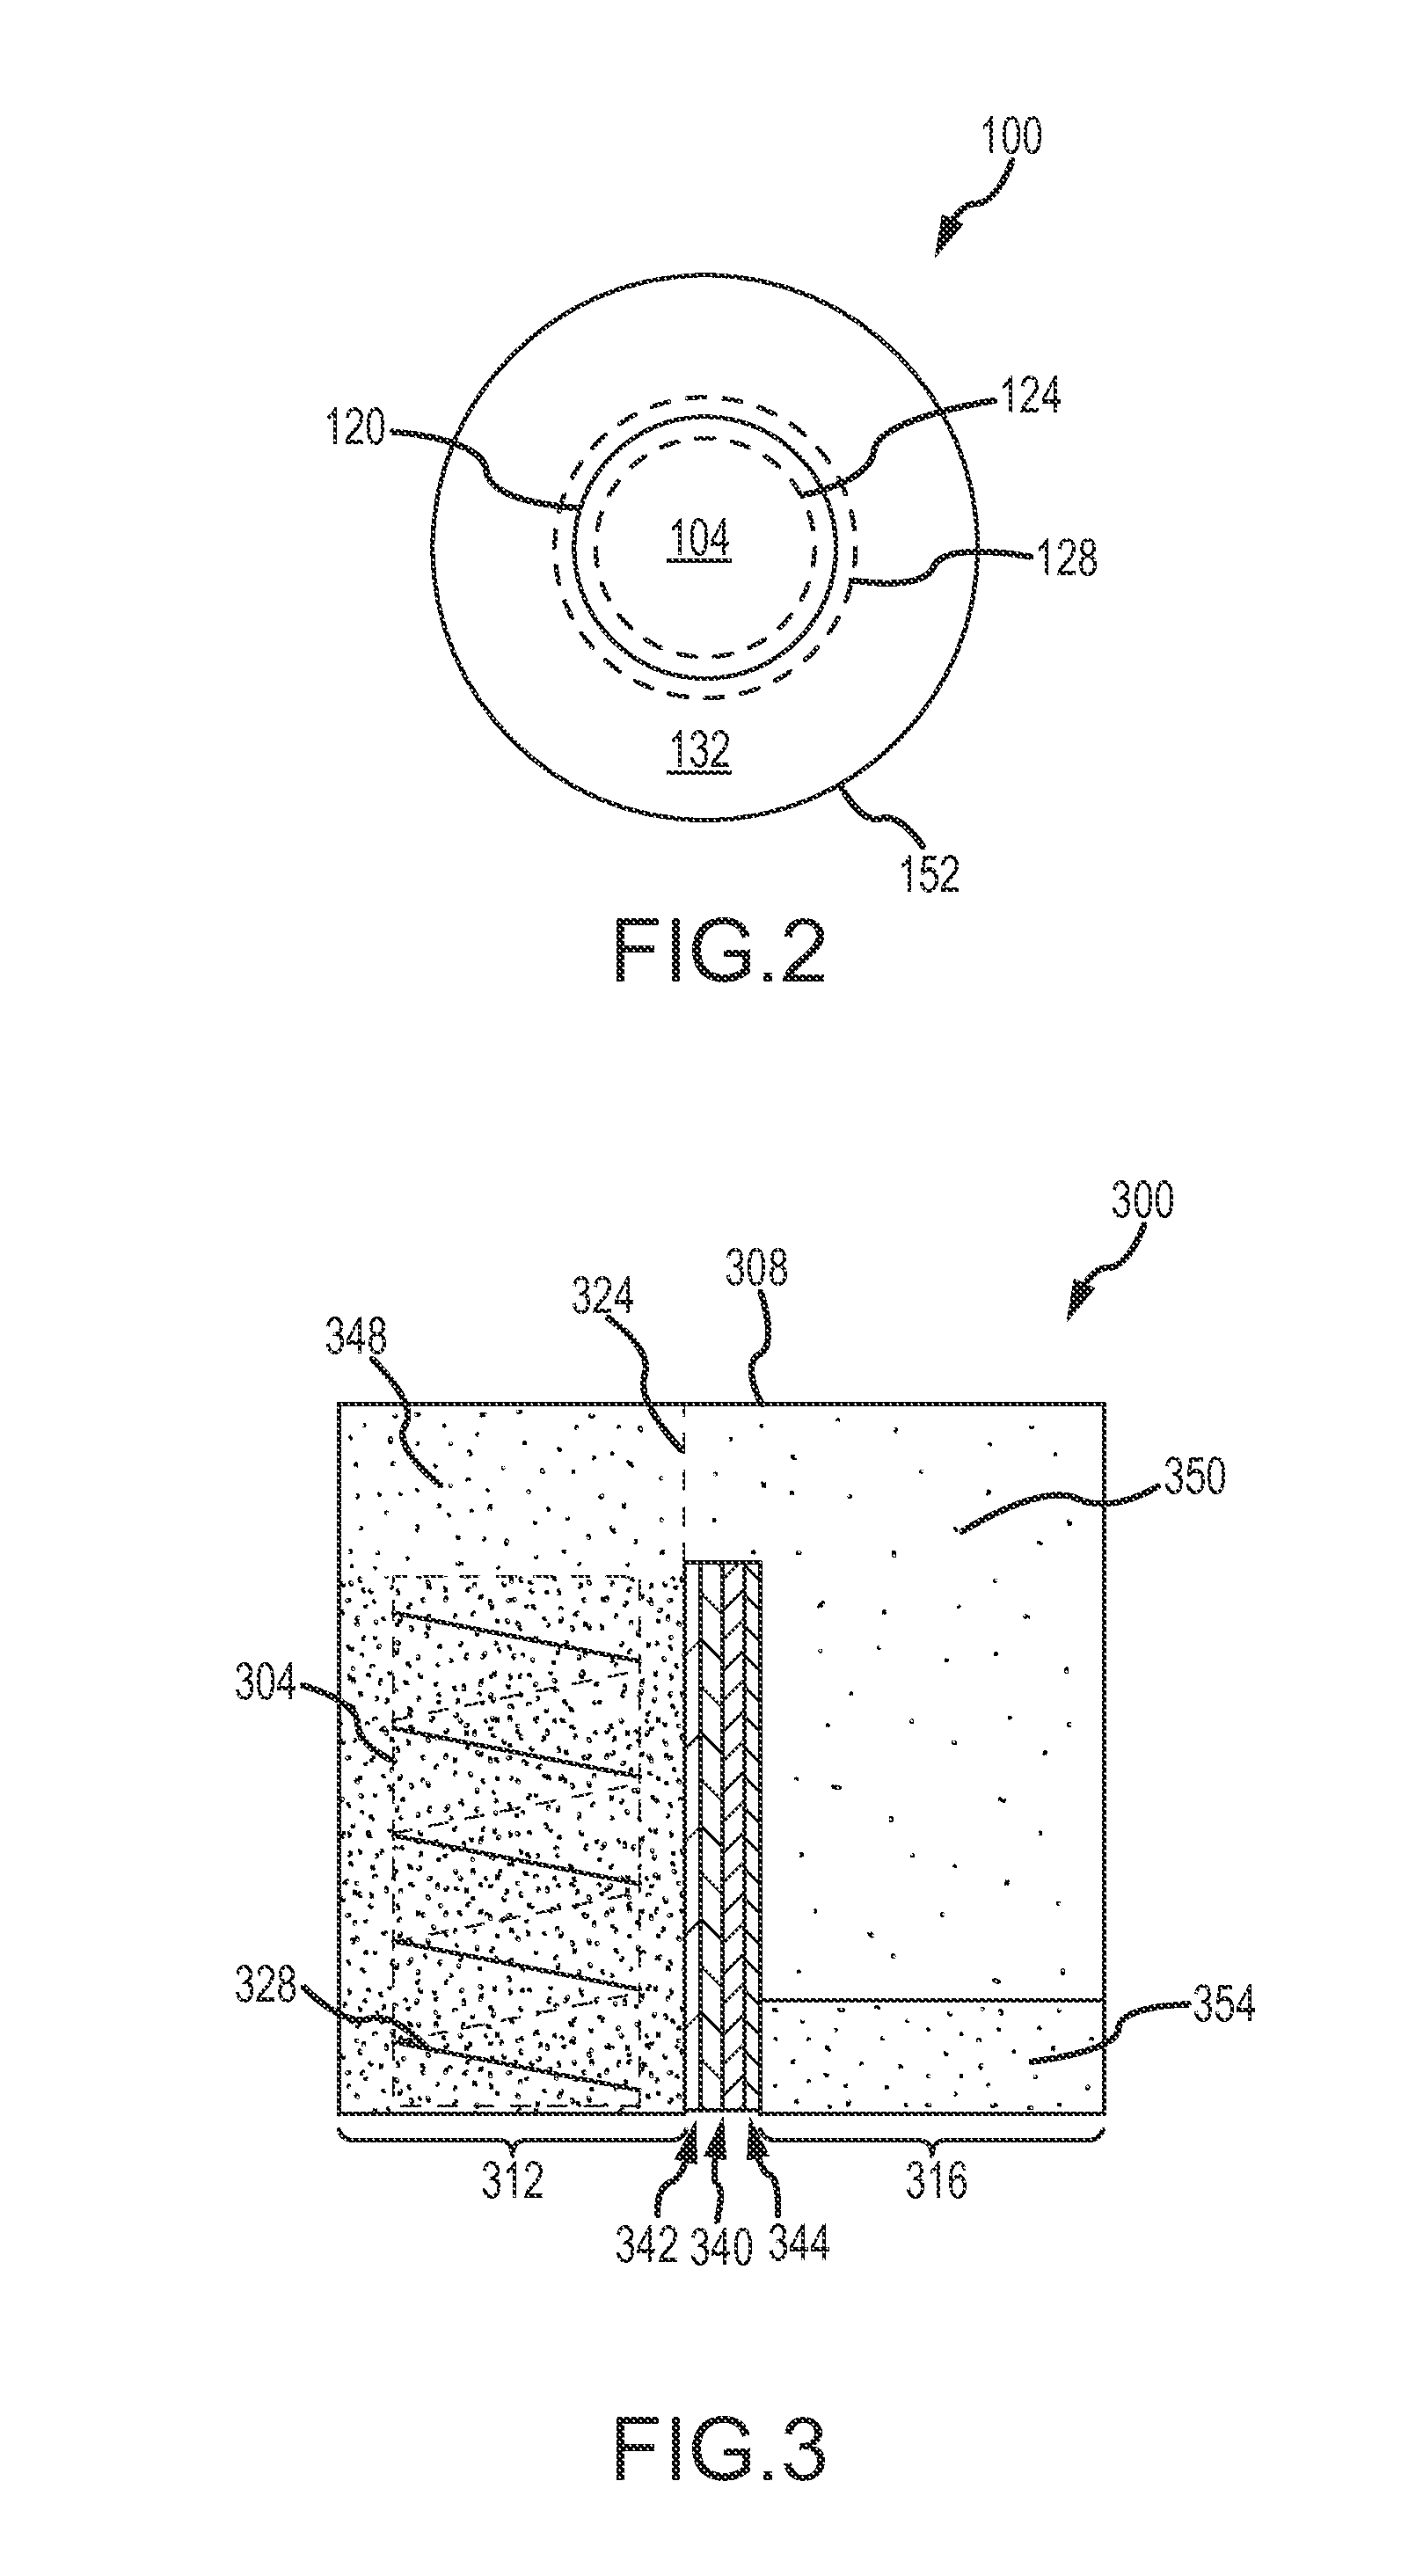 Dryer and water recovery/purification unit employing graphene oxide or perforated graphene monolayer membranes